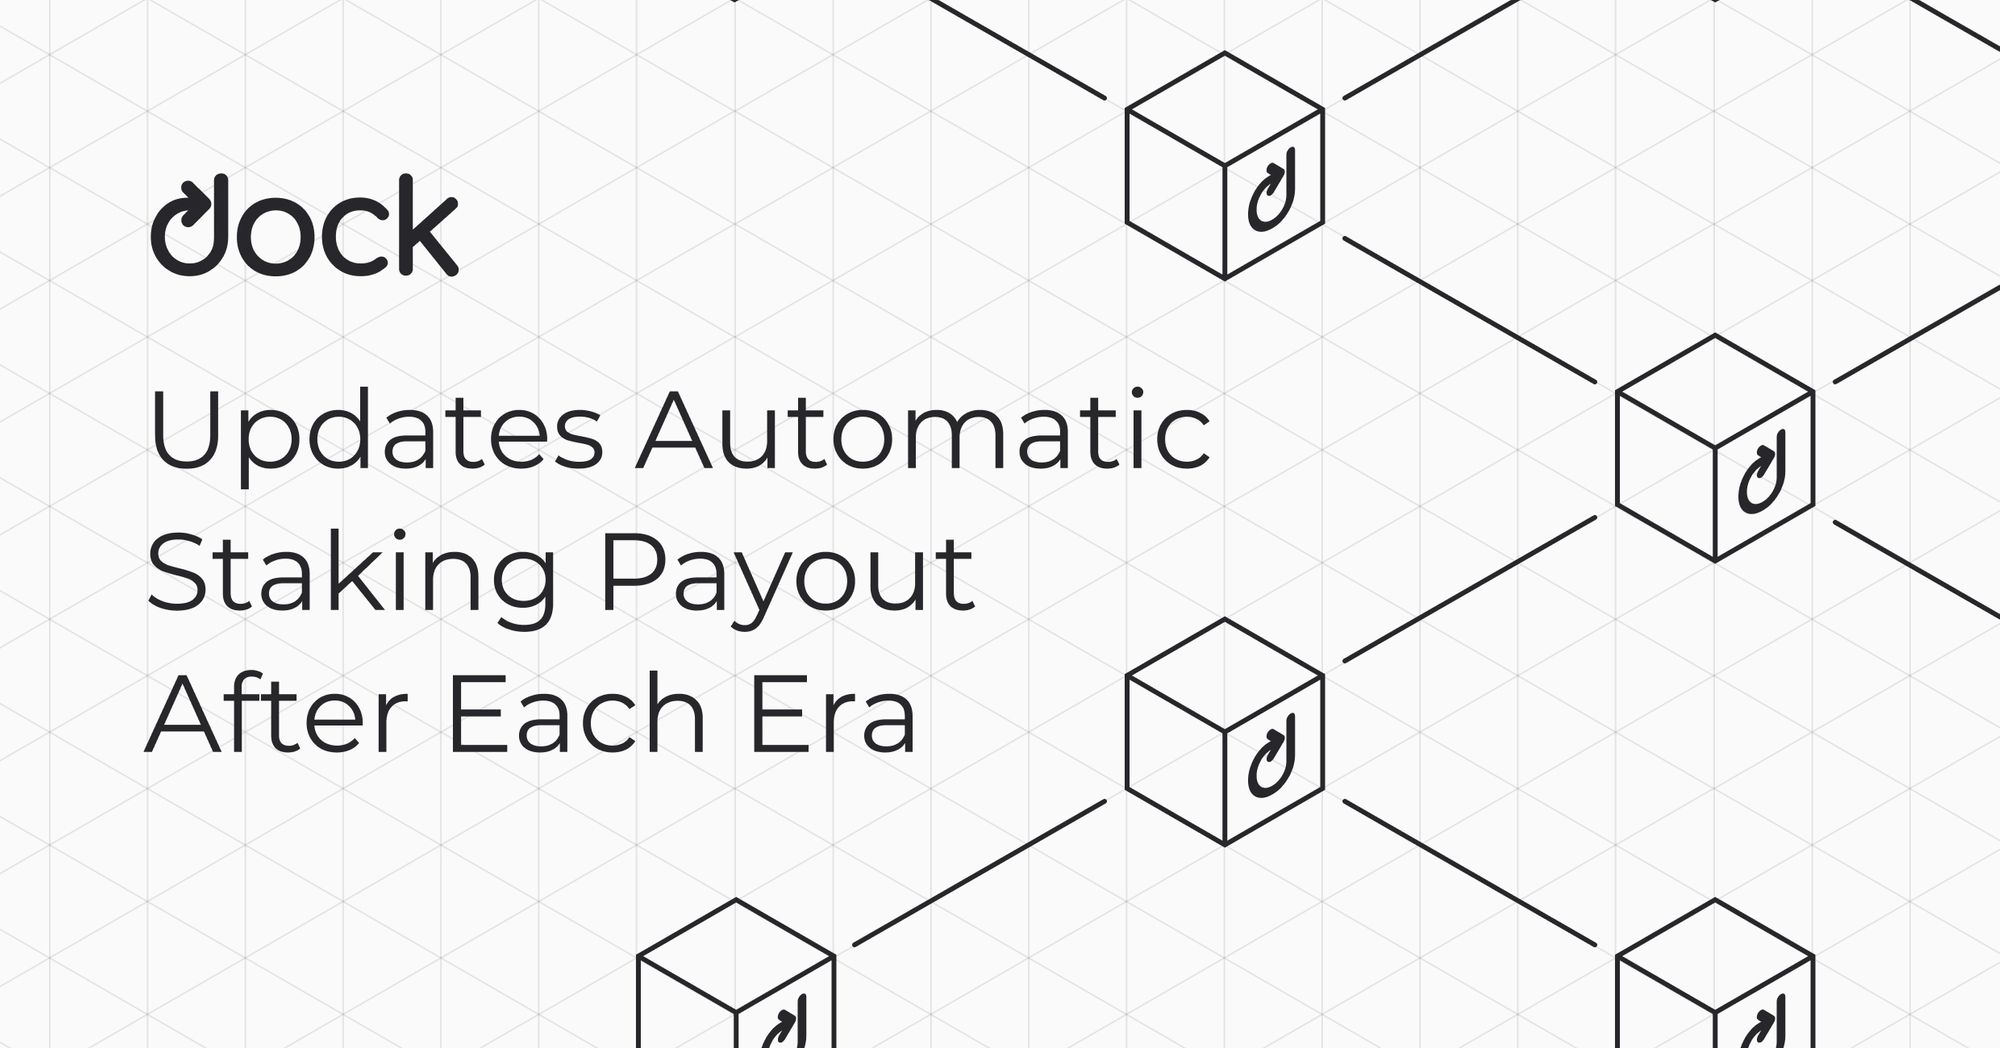 Dock Updates Automatic Staking Payout After Each Era